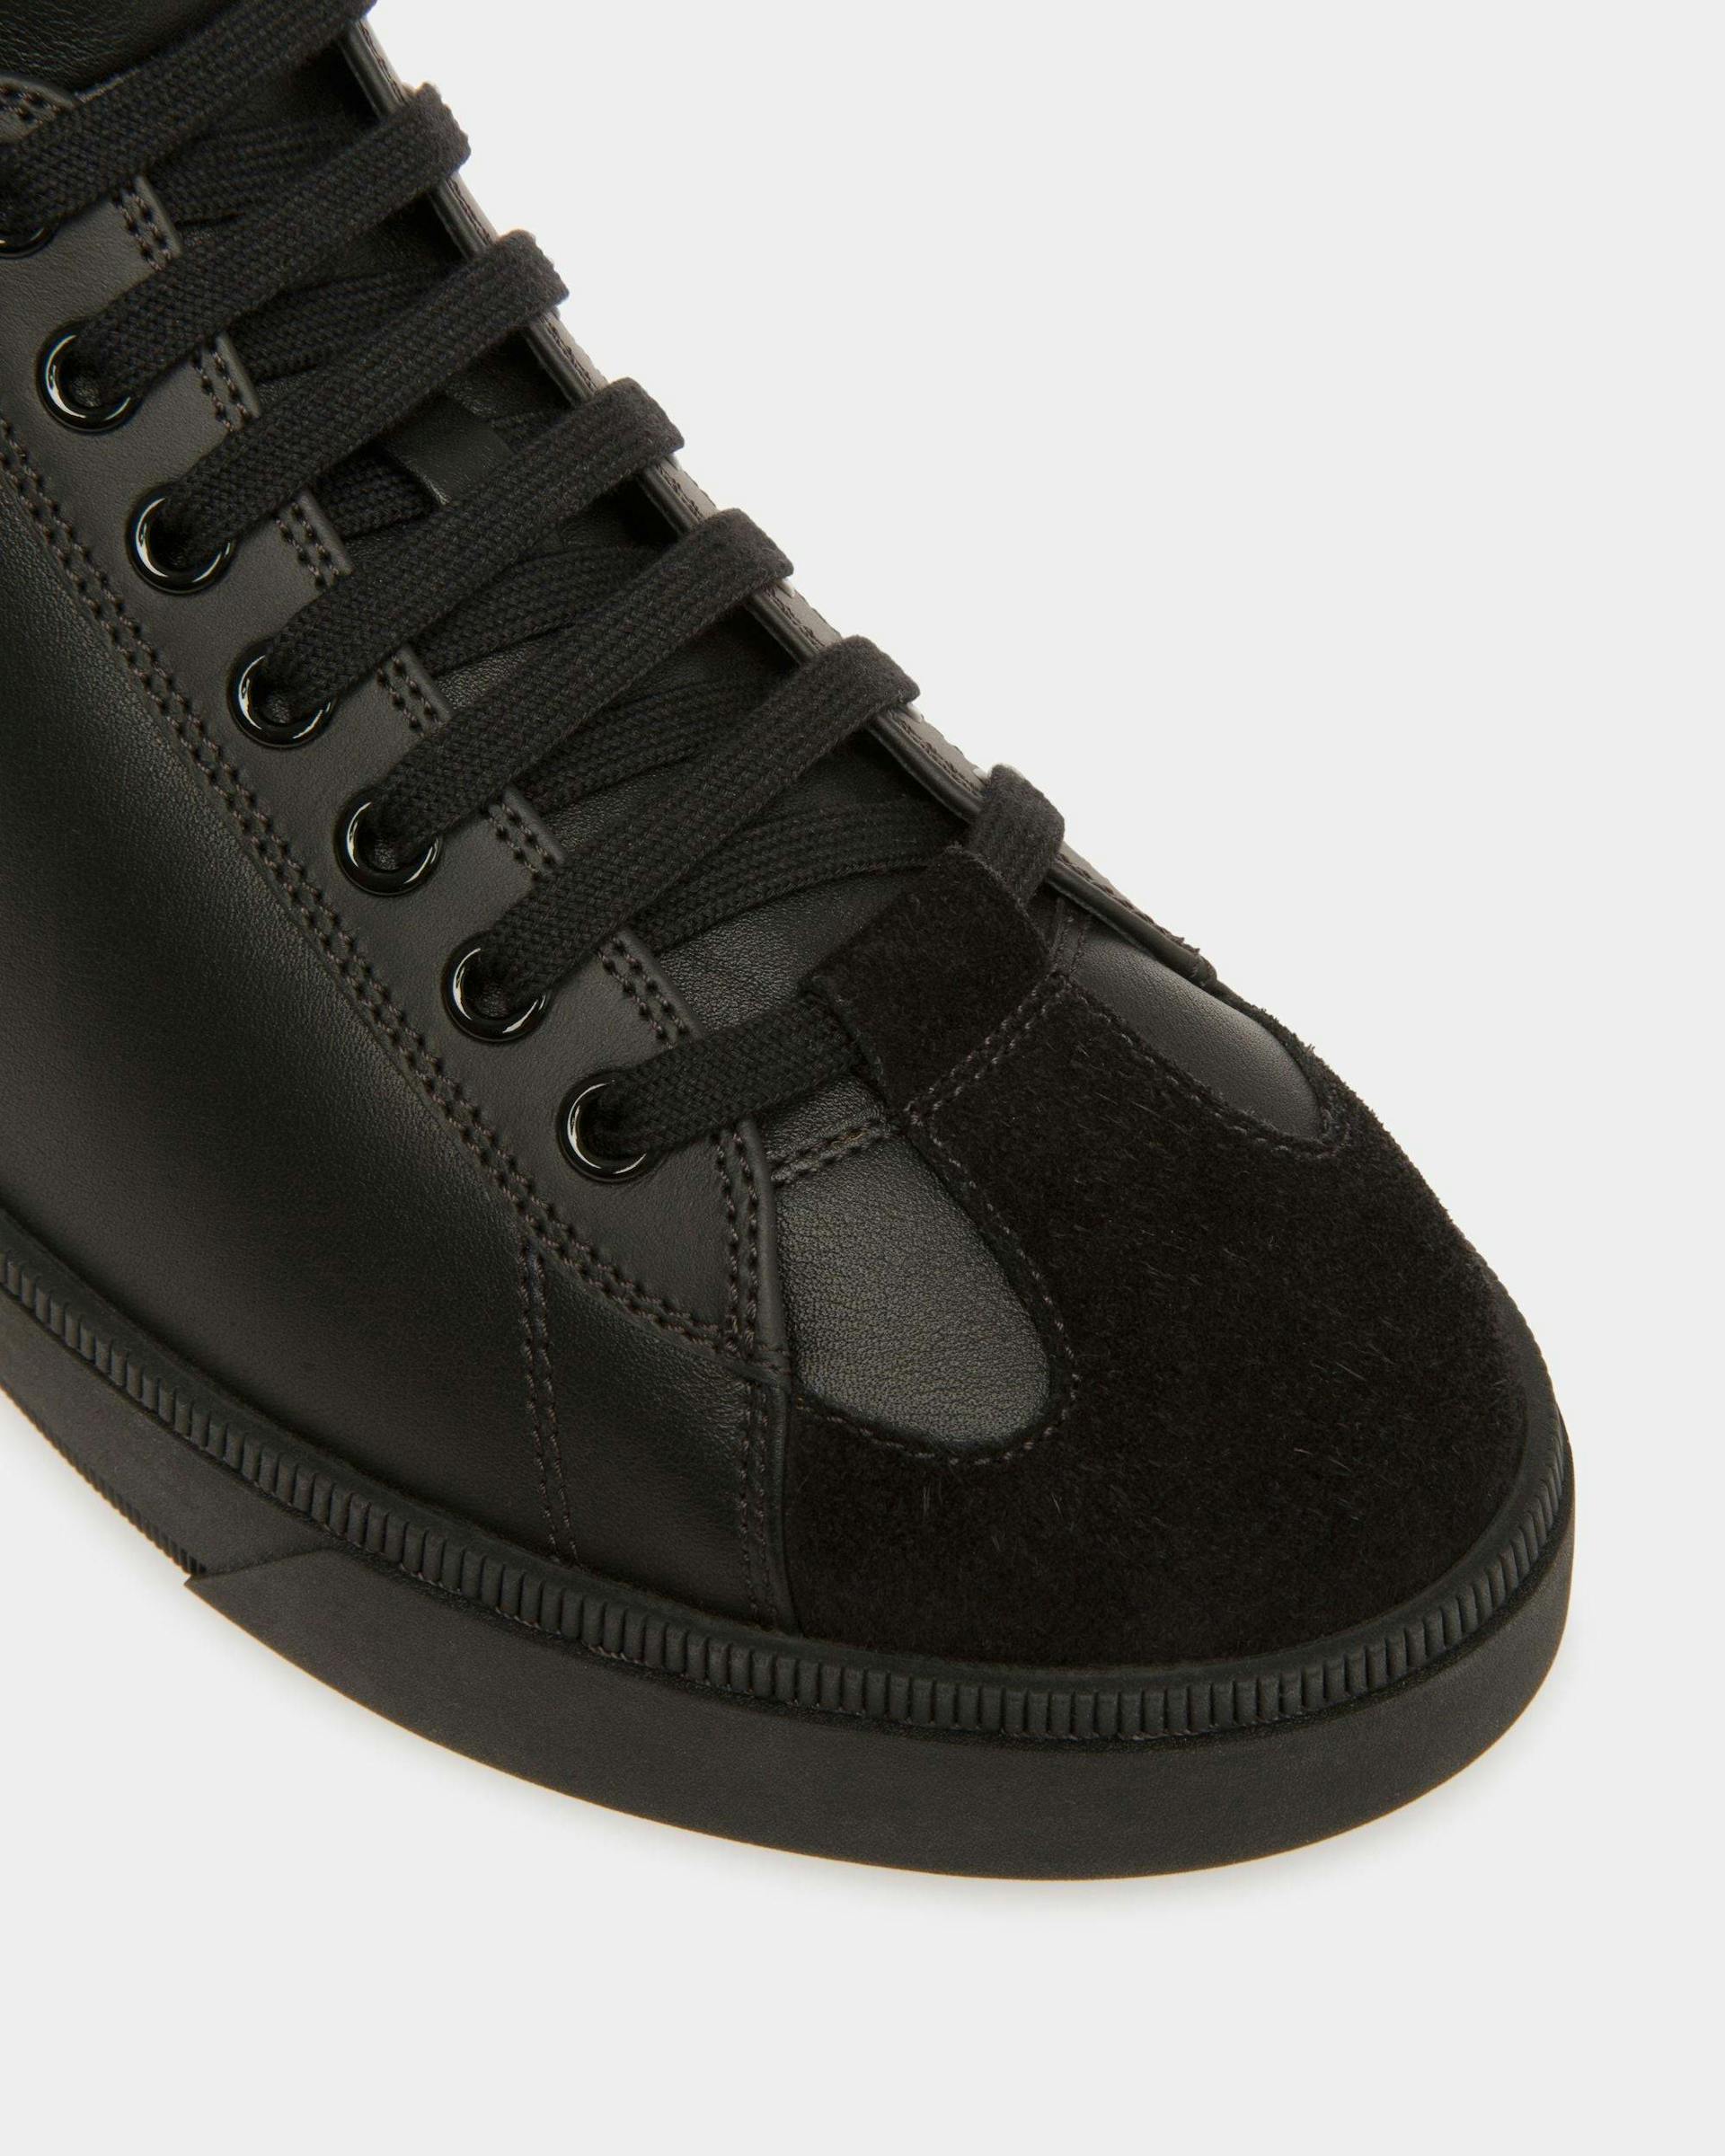 Raise Sneakers In Black And Python Print Leather - Men's - Bally - 06